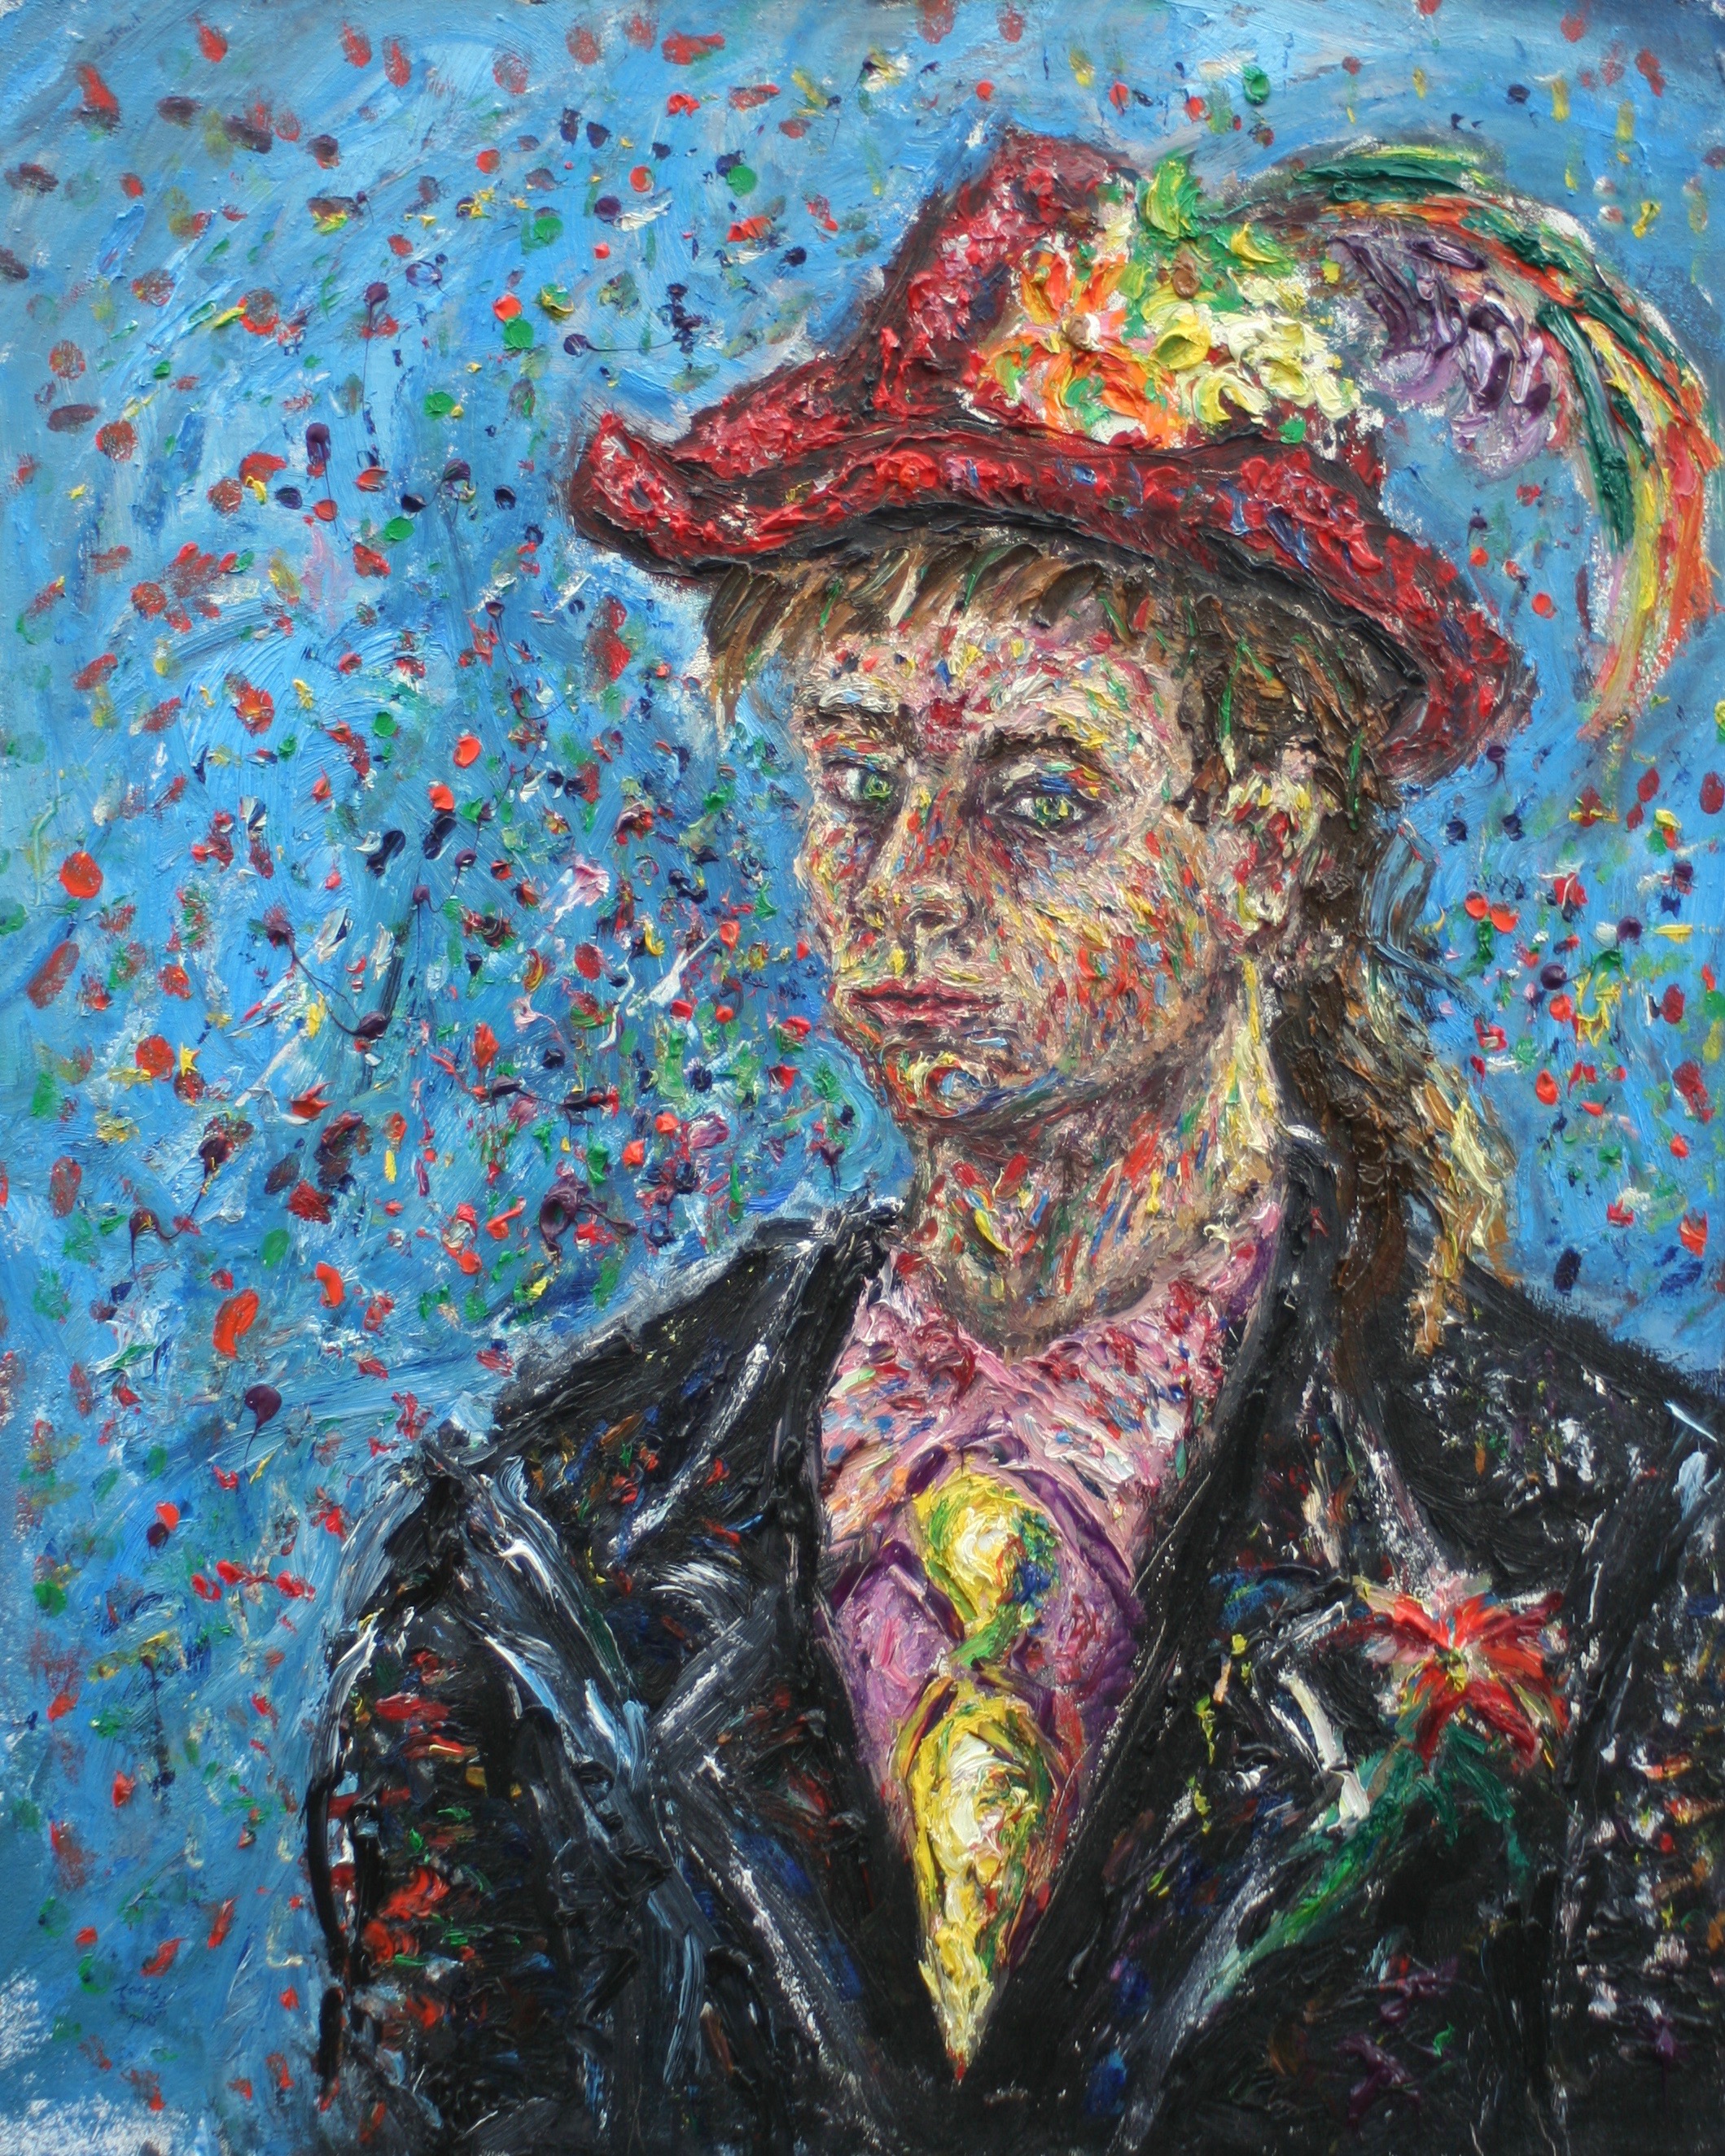 Self Portrait with Hat 30"x24" oil on canvas 1993